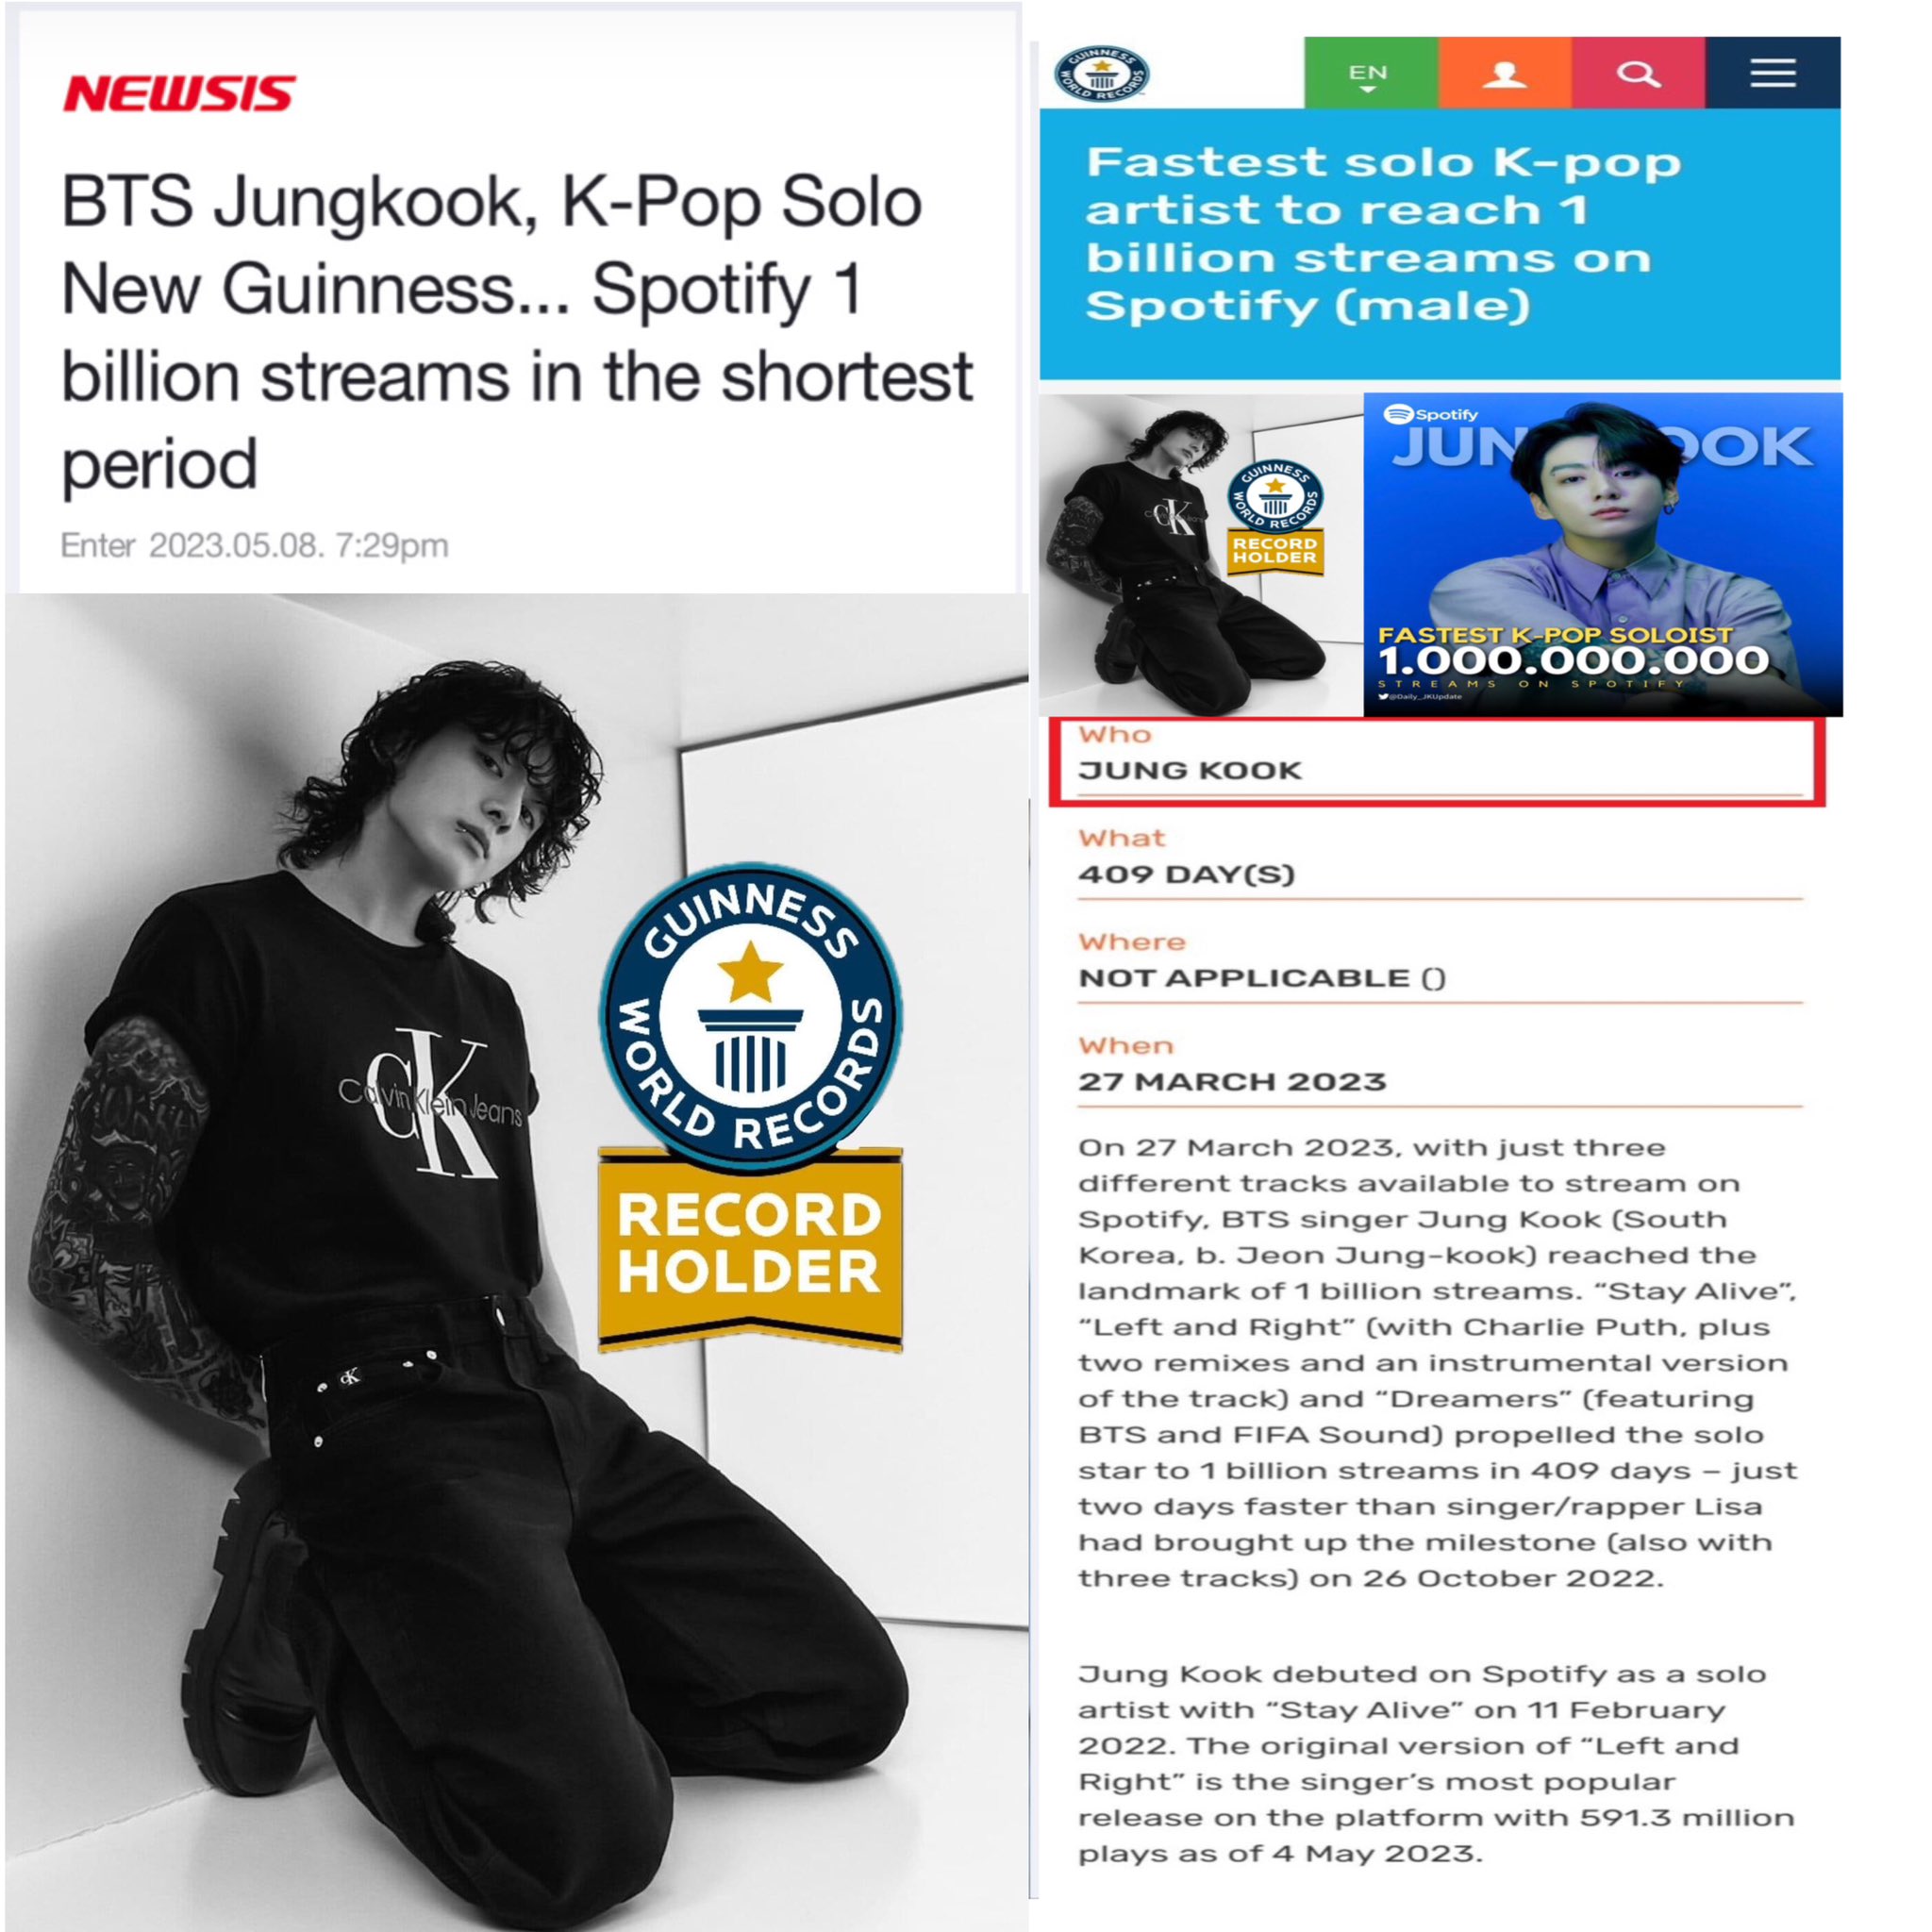 Today's K-pop] BTS' Jungkook sets Guinness record with Spotify streams